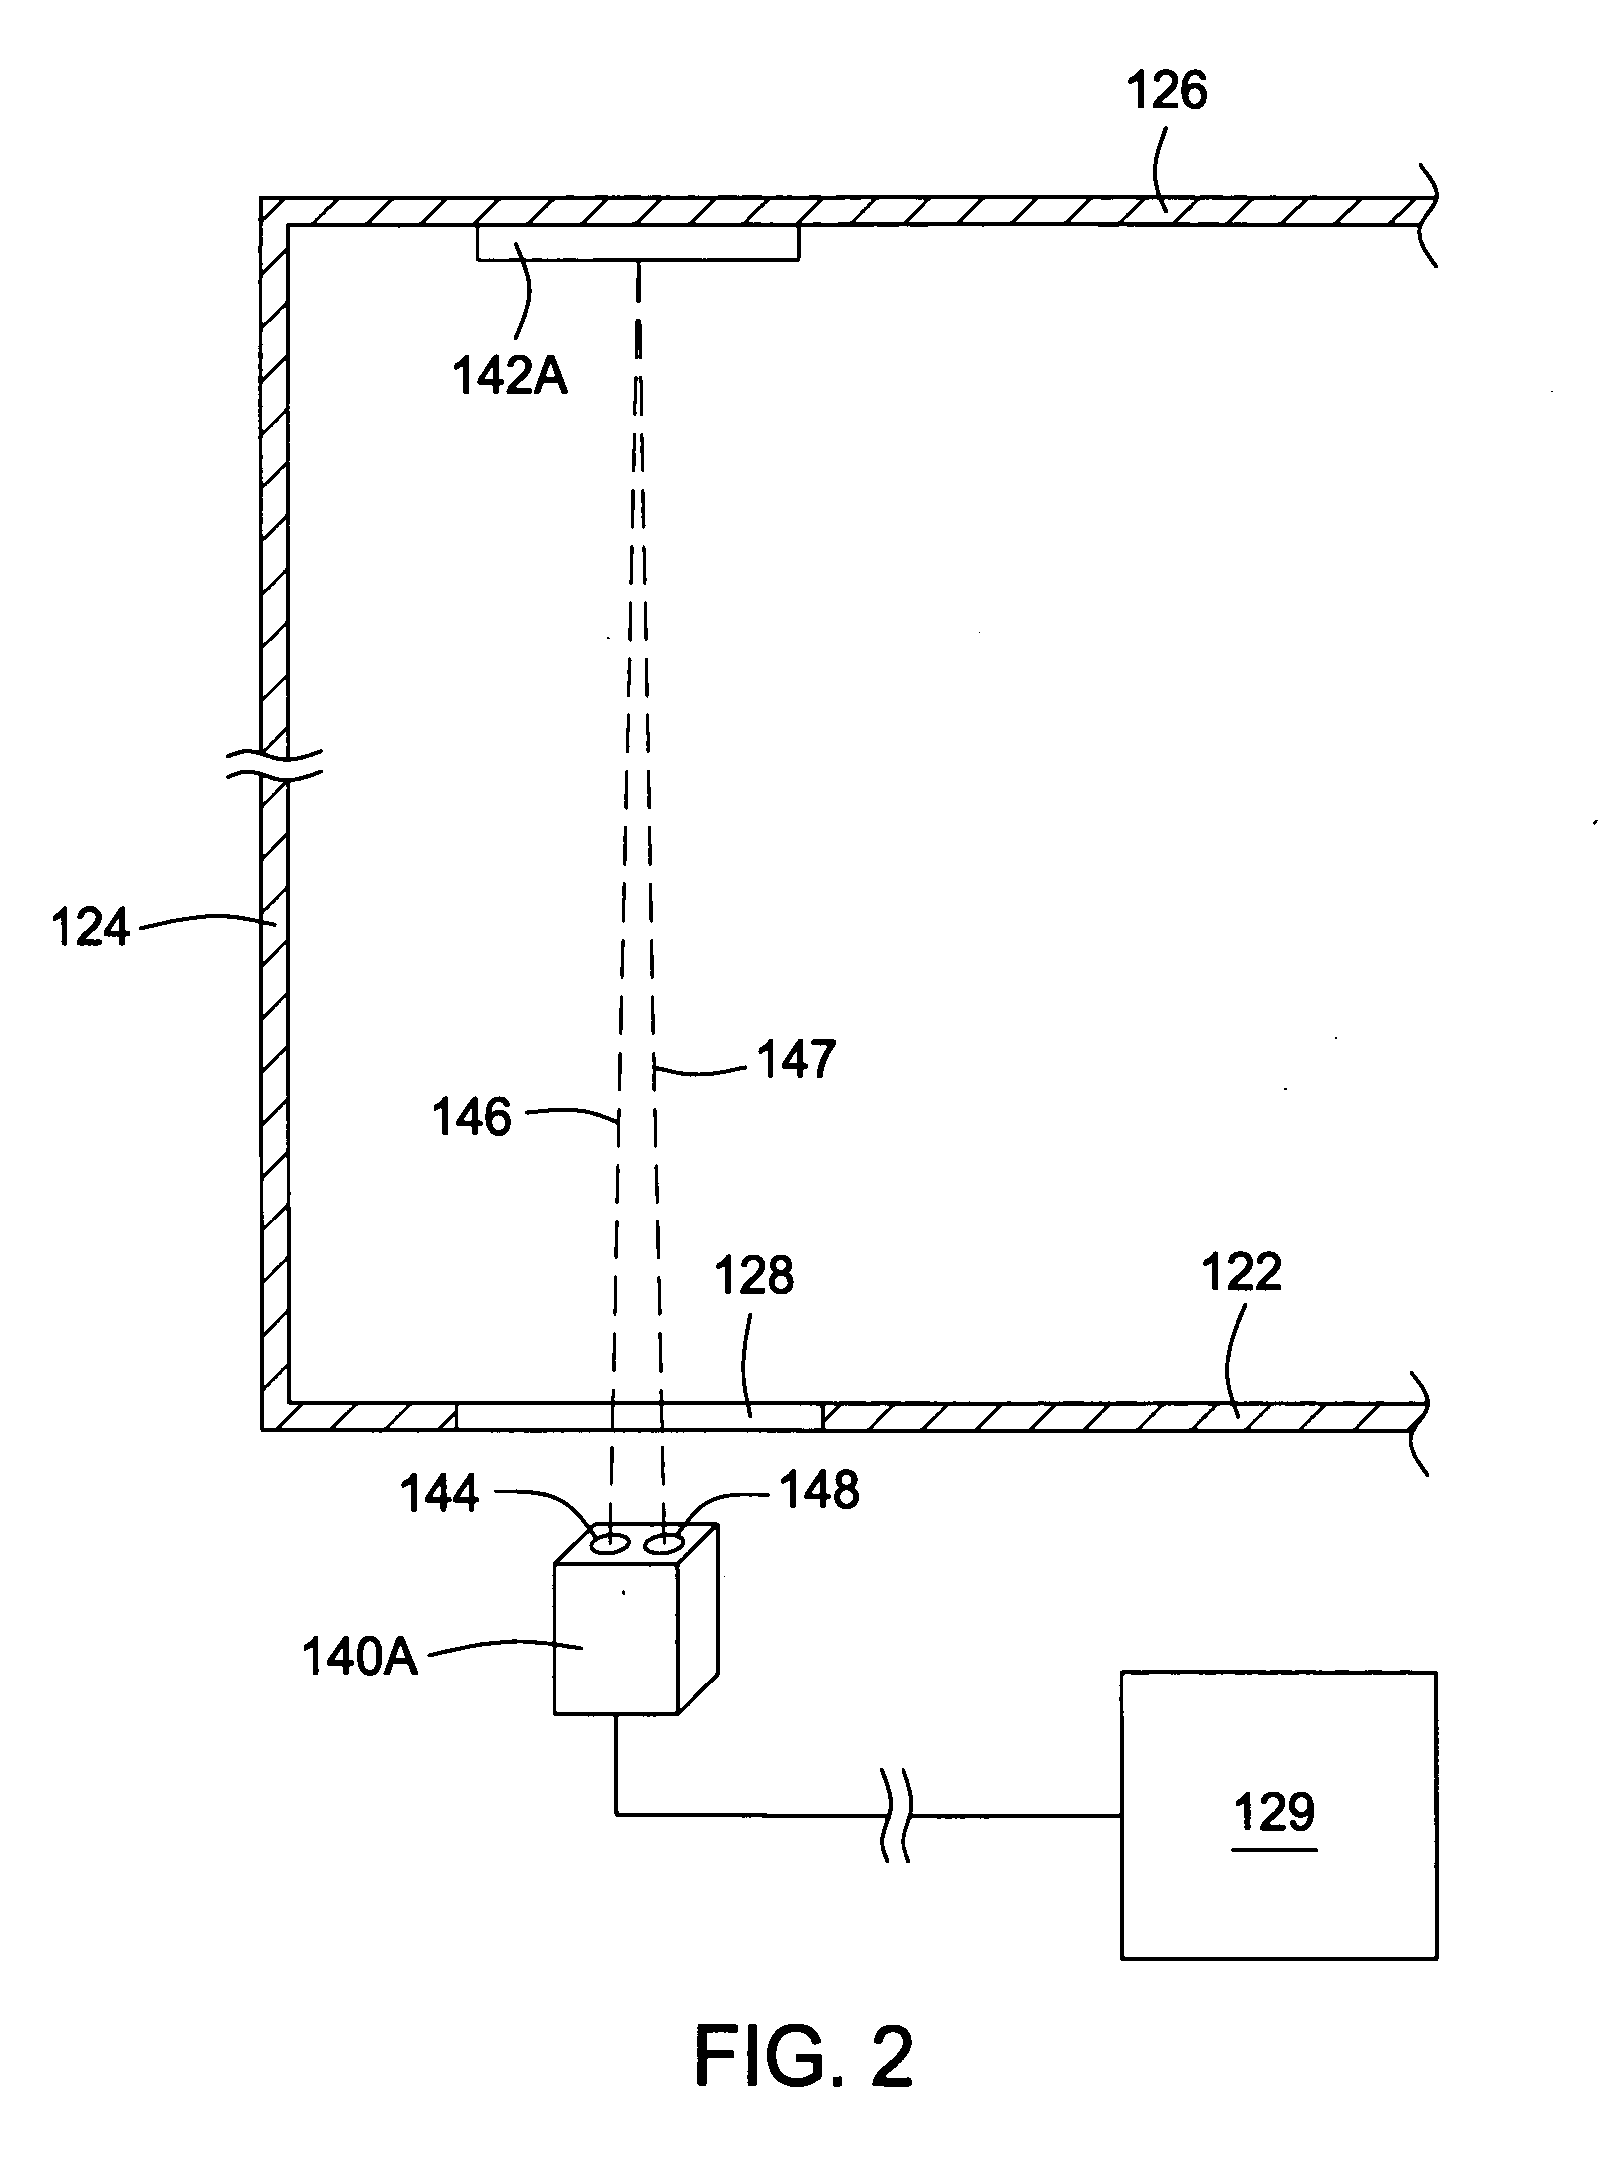 Sensors for dynamically detecting substrate breakage and misalignment of a moving substrate